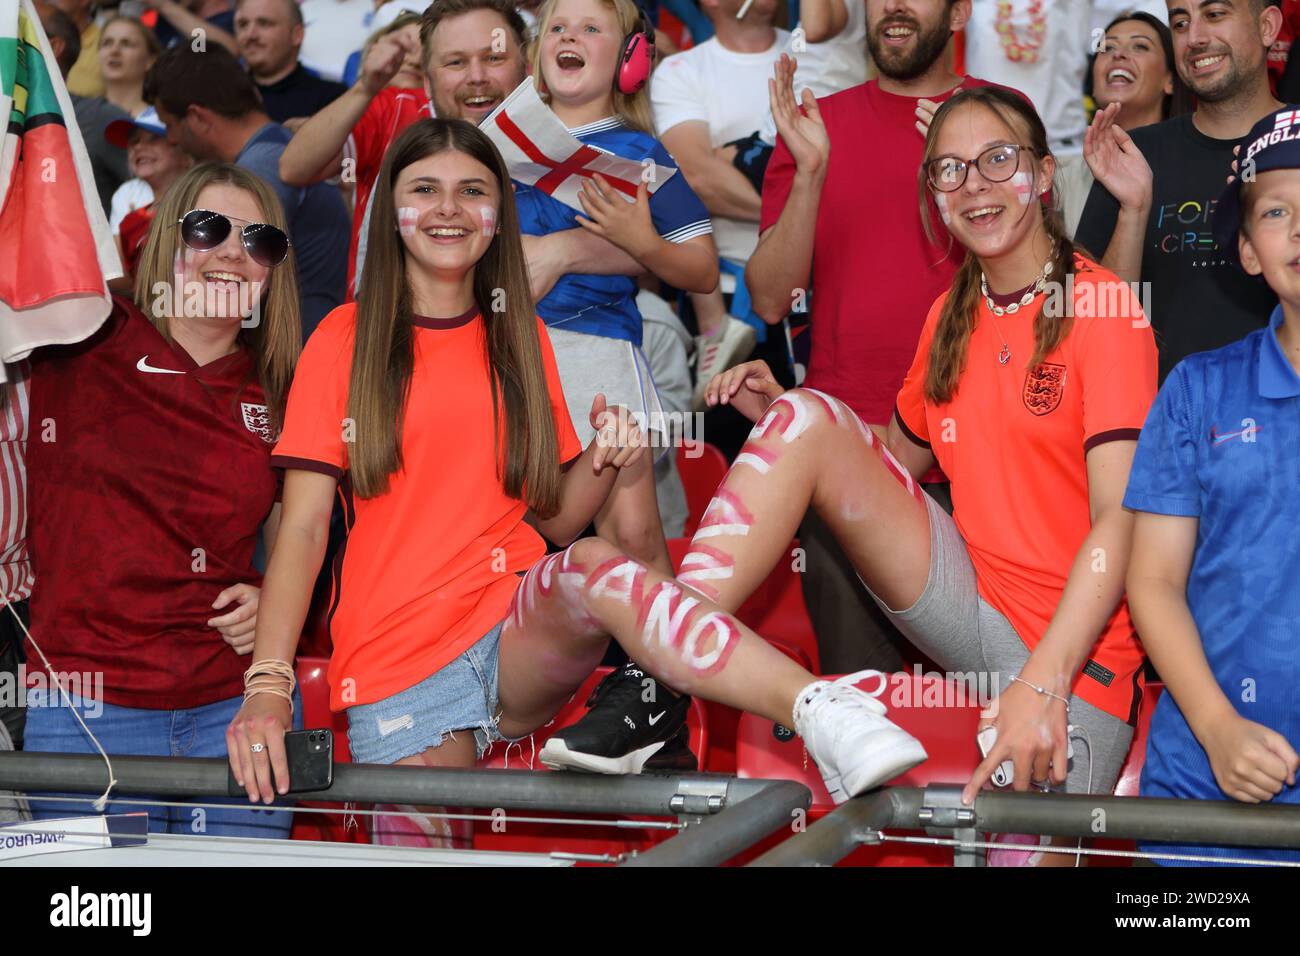 Fans with face paint/ legs painted celebrate after England win UEFA Women's Euro Final 2022 England v Germany at Wembley Stadium, London 31 July 2022 Stock Photo